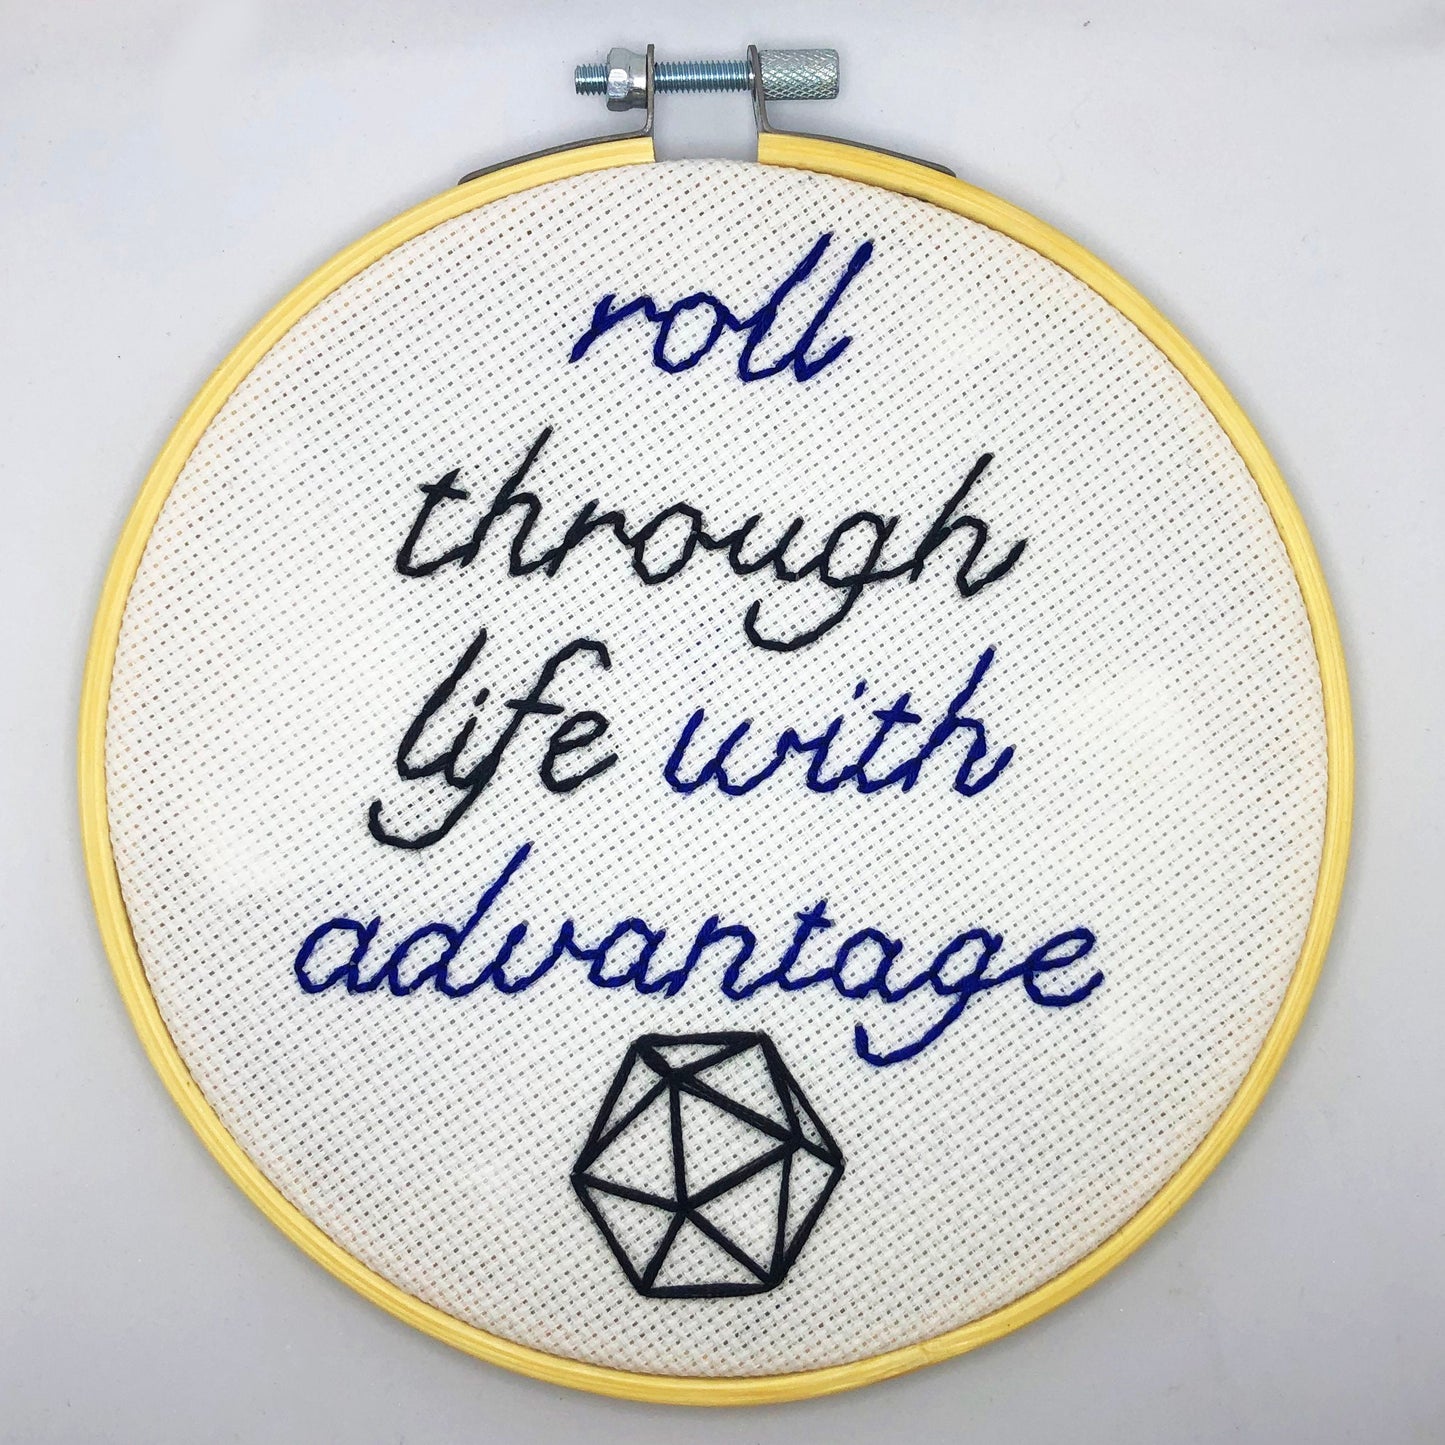 Dimension 20 embroidery